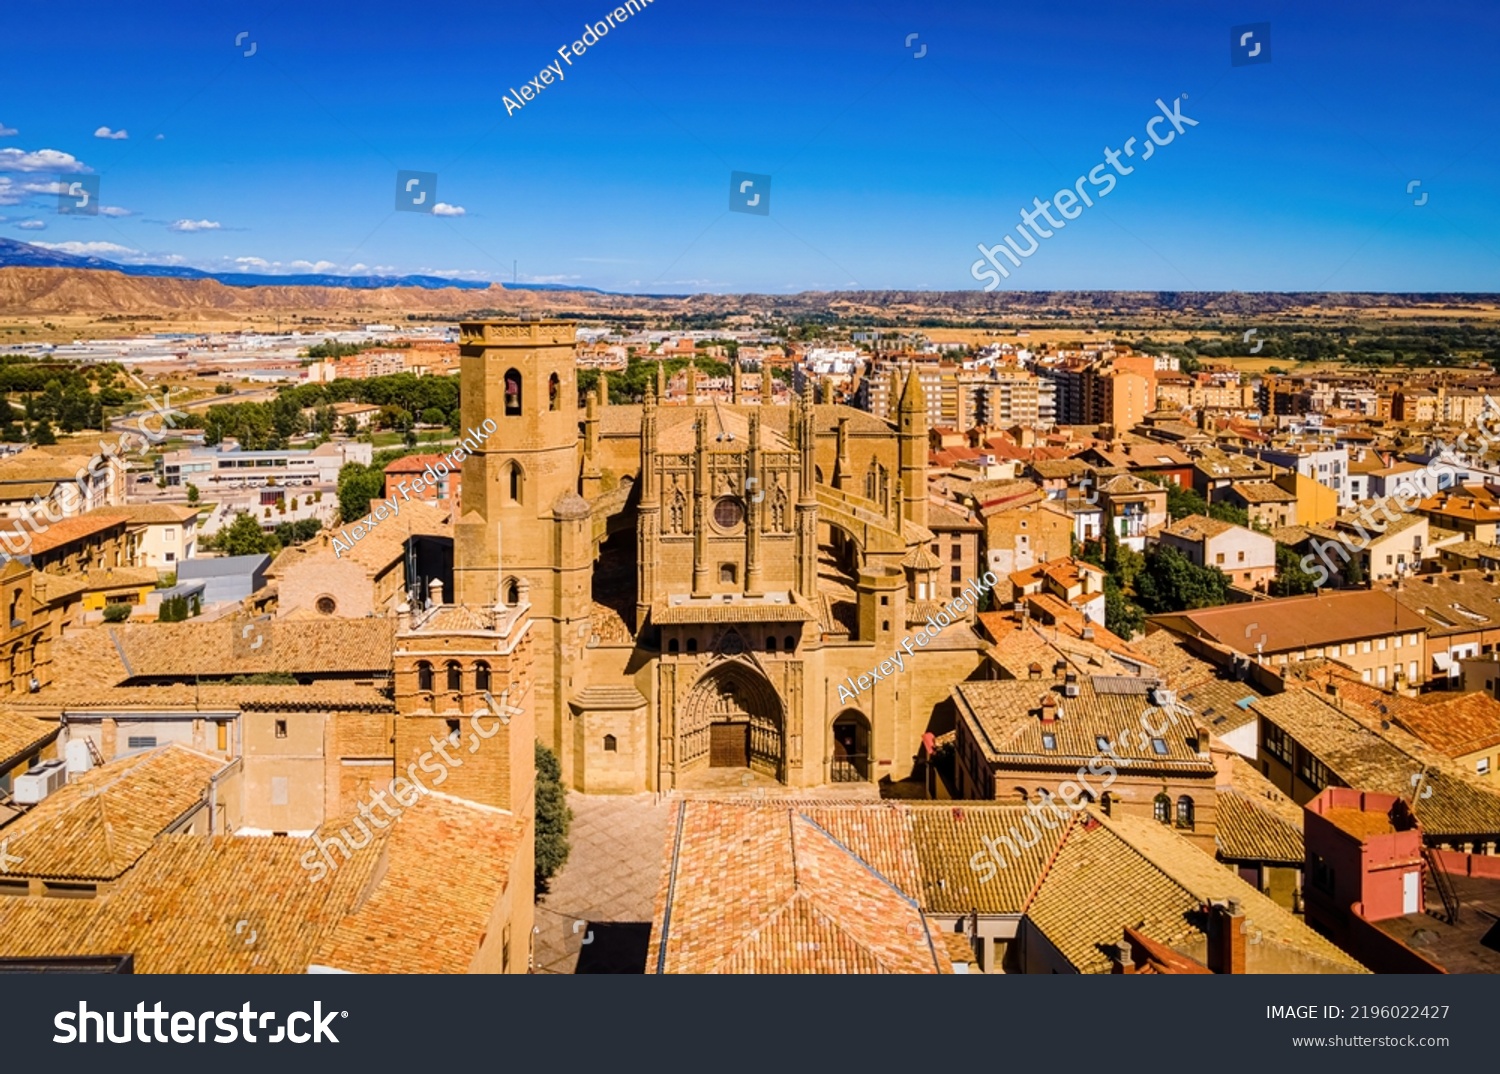 Aerial view of Huesca, a hilly medieval old town in Spain topped by Gothic Huesca Cathedral #2196022427